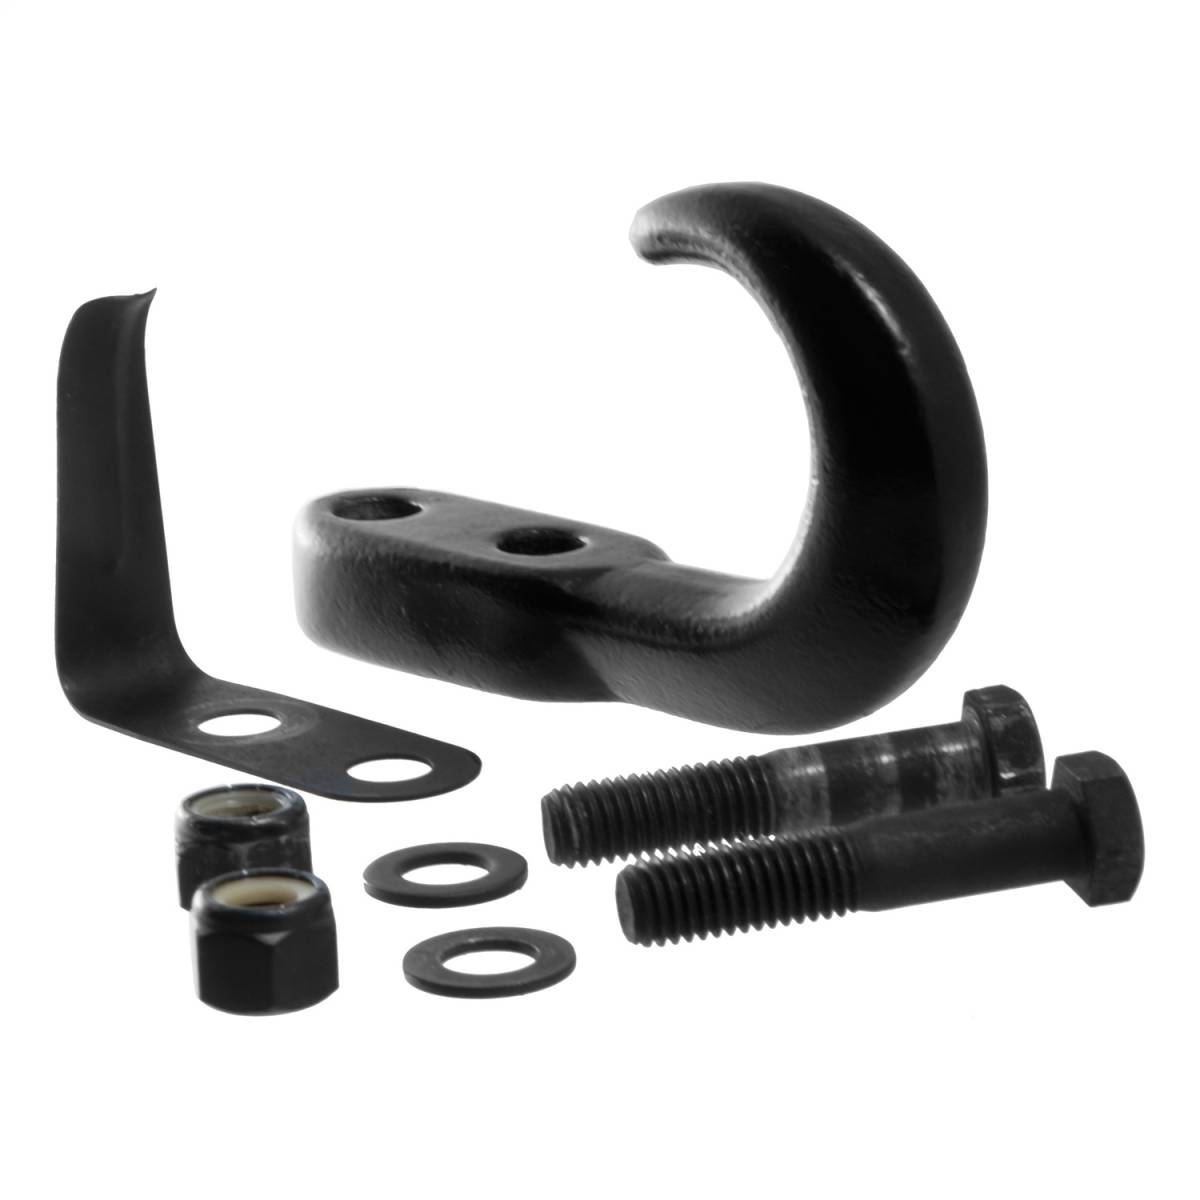 Tow Hook, CURT, 22411  Nelson Truck Equipment and Accessories